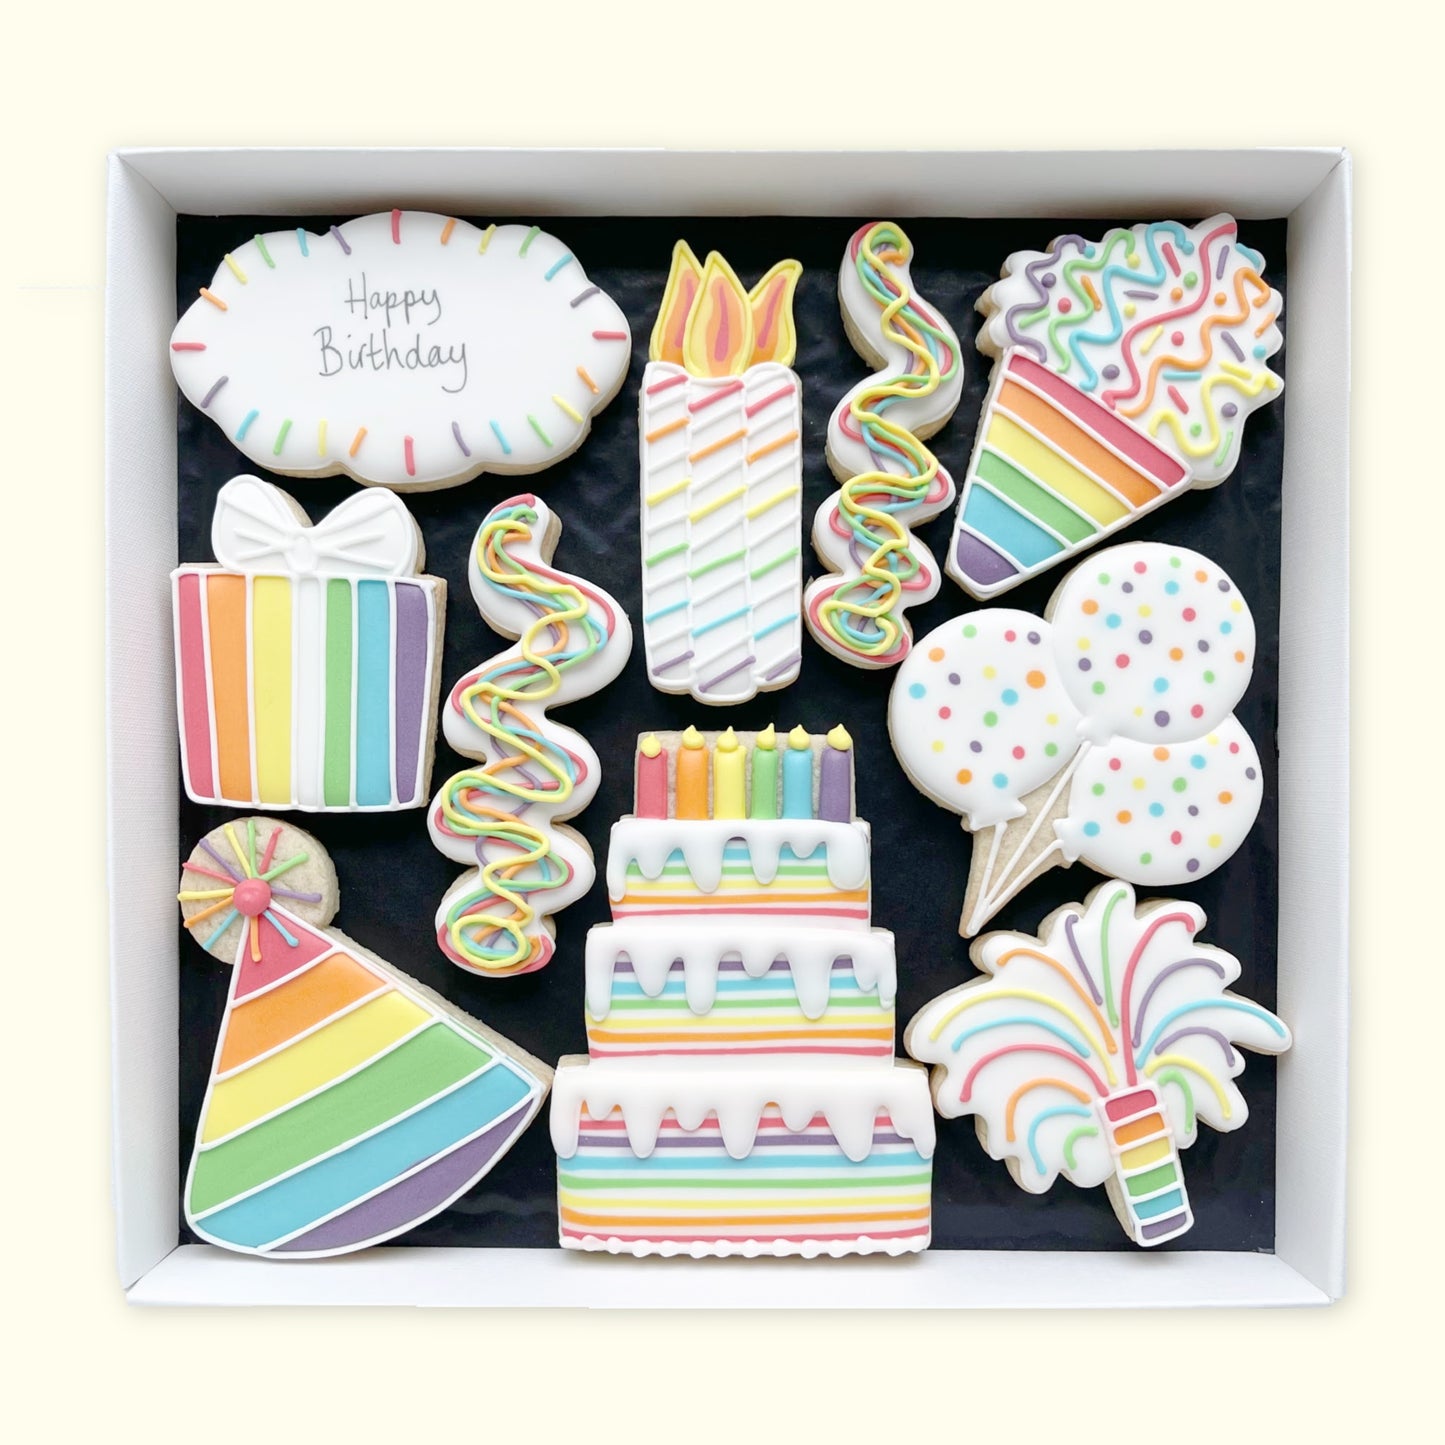 Rainbow happy birthday hand iced biscuits by Katie's Biscuit shop in an open white gift box